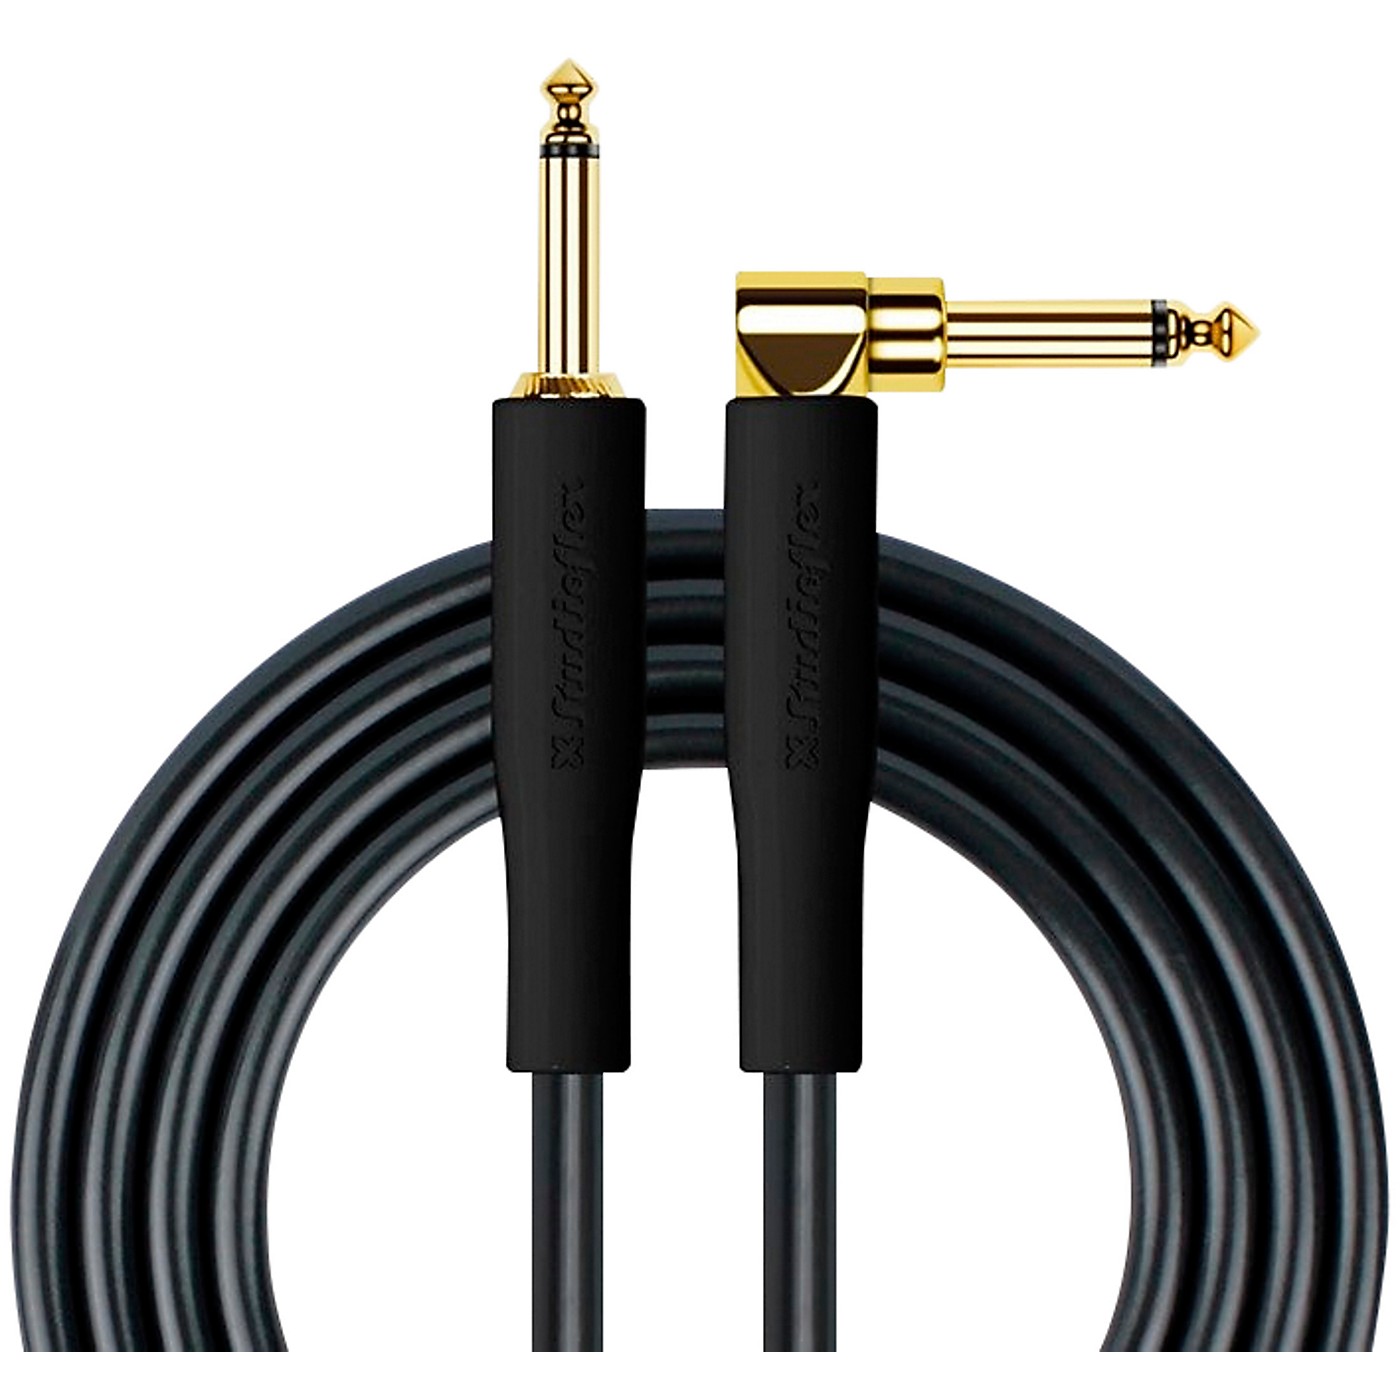 Studioflex Ultra Series Straight to Angle Instrument Cable thumbnail